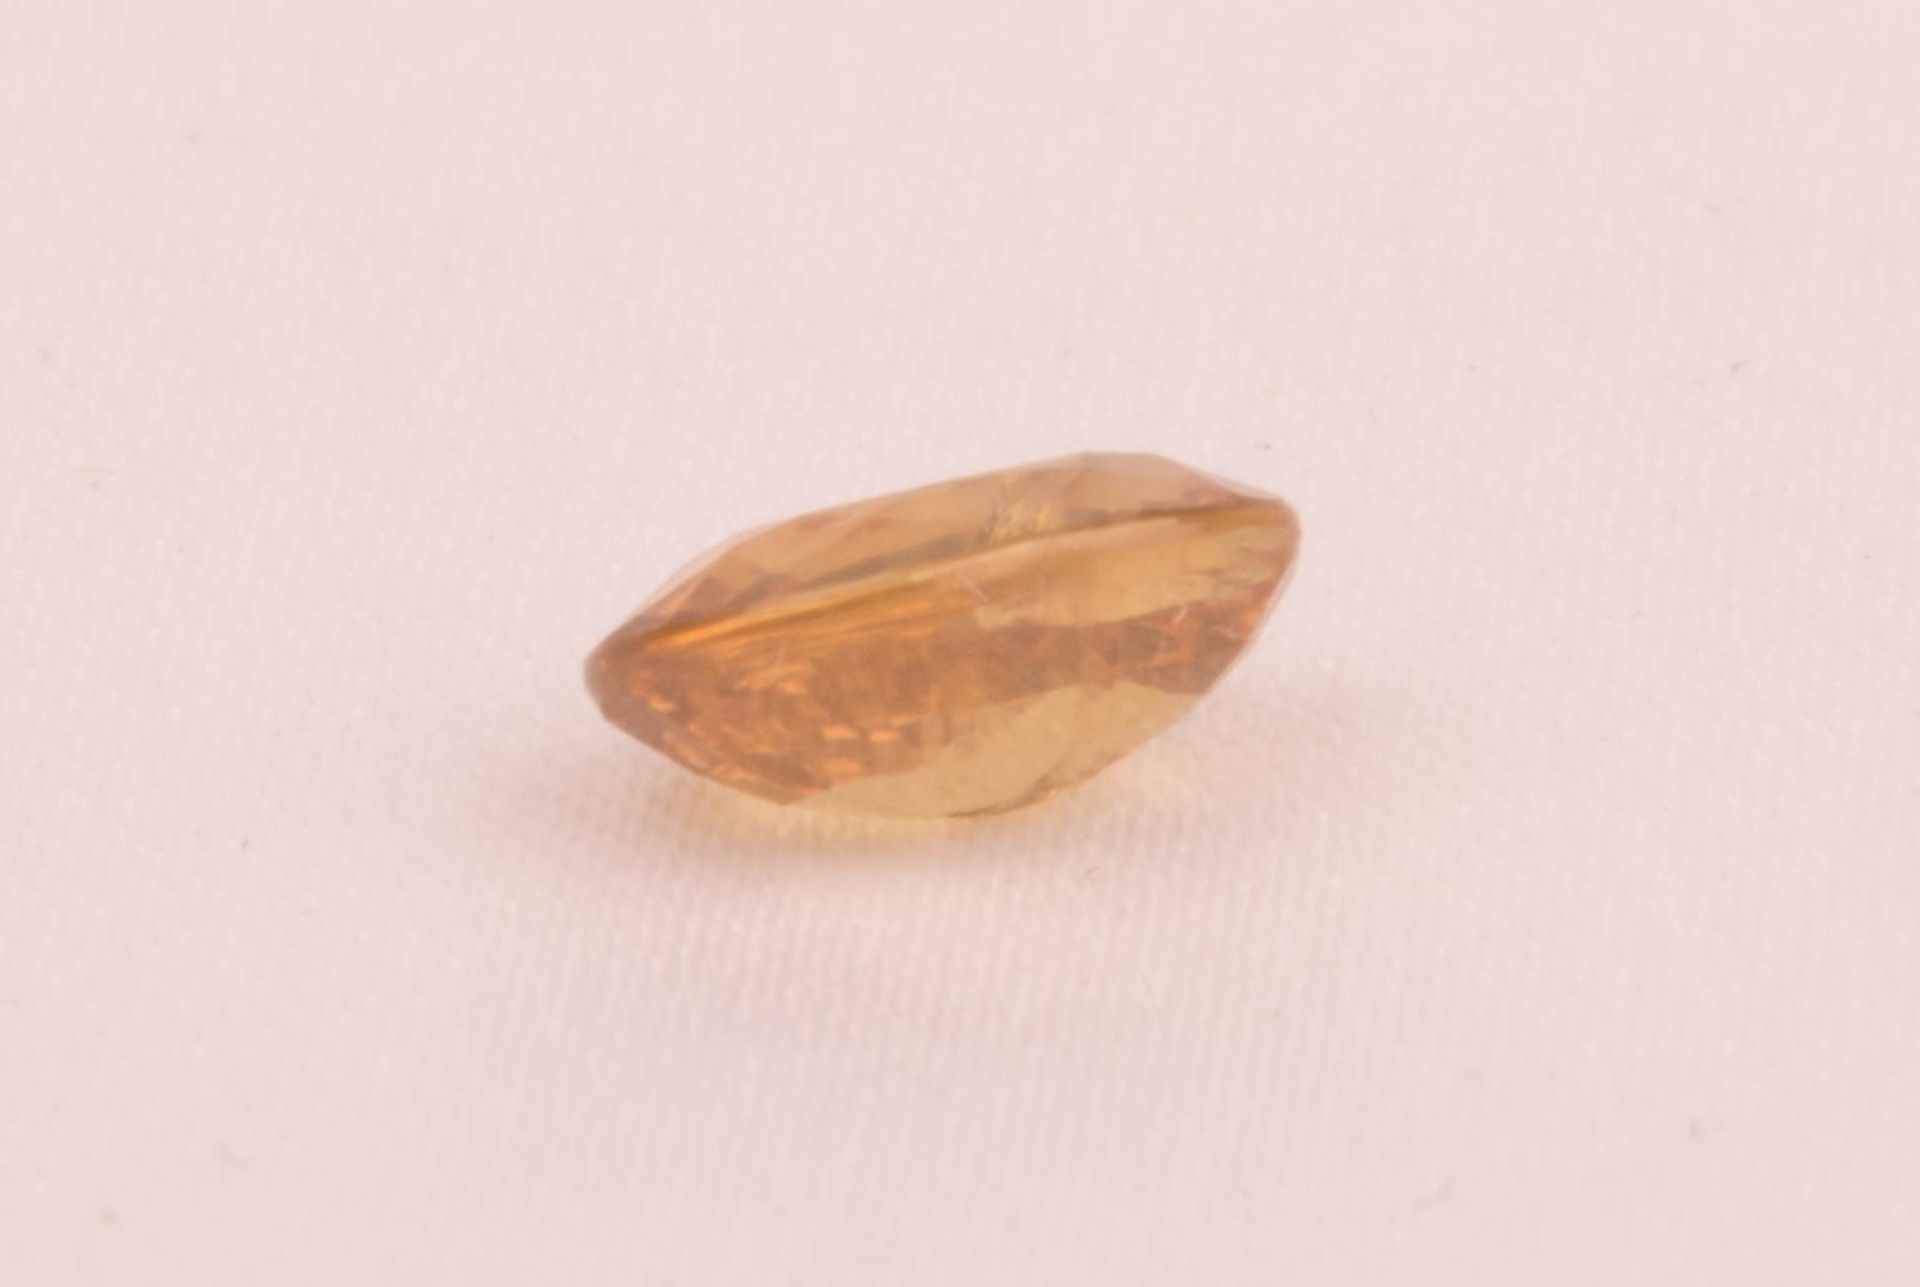 Natural sapphire, 1.15 ct. - Image 11 of 12